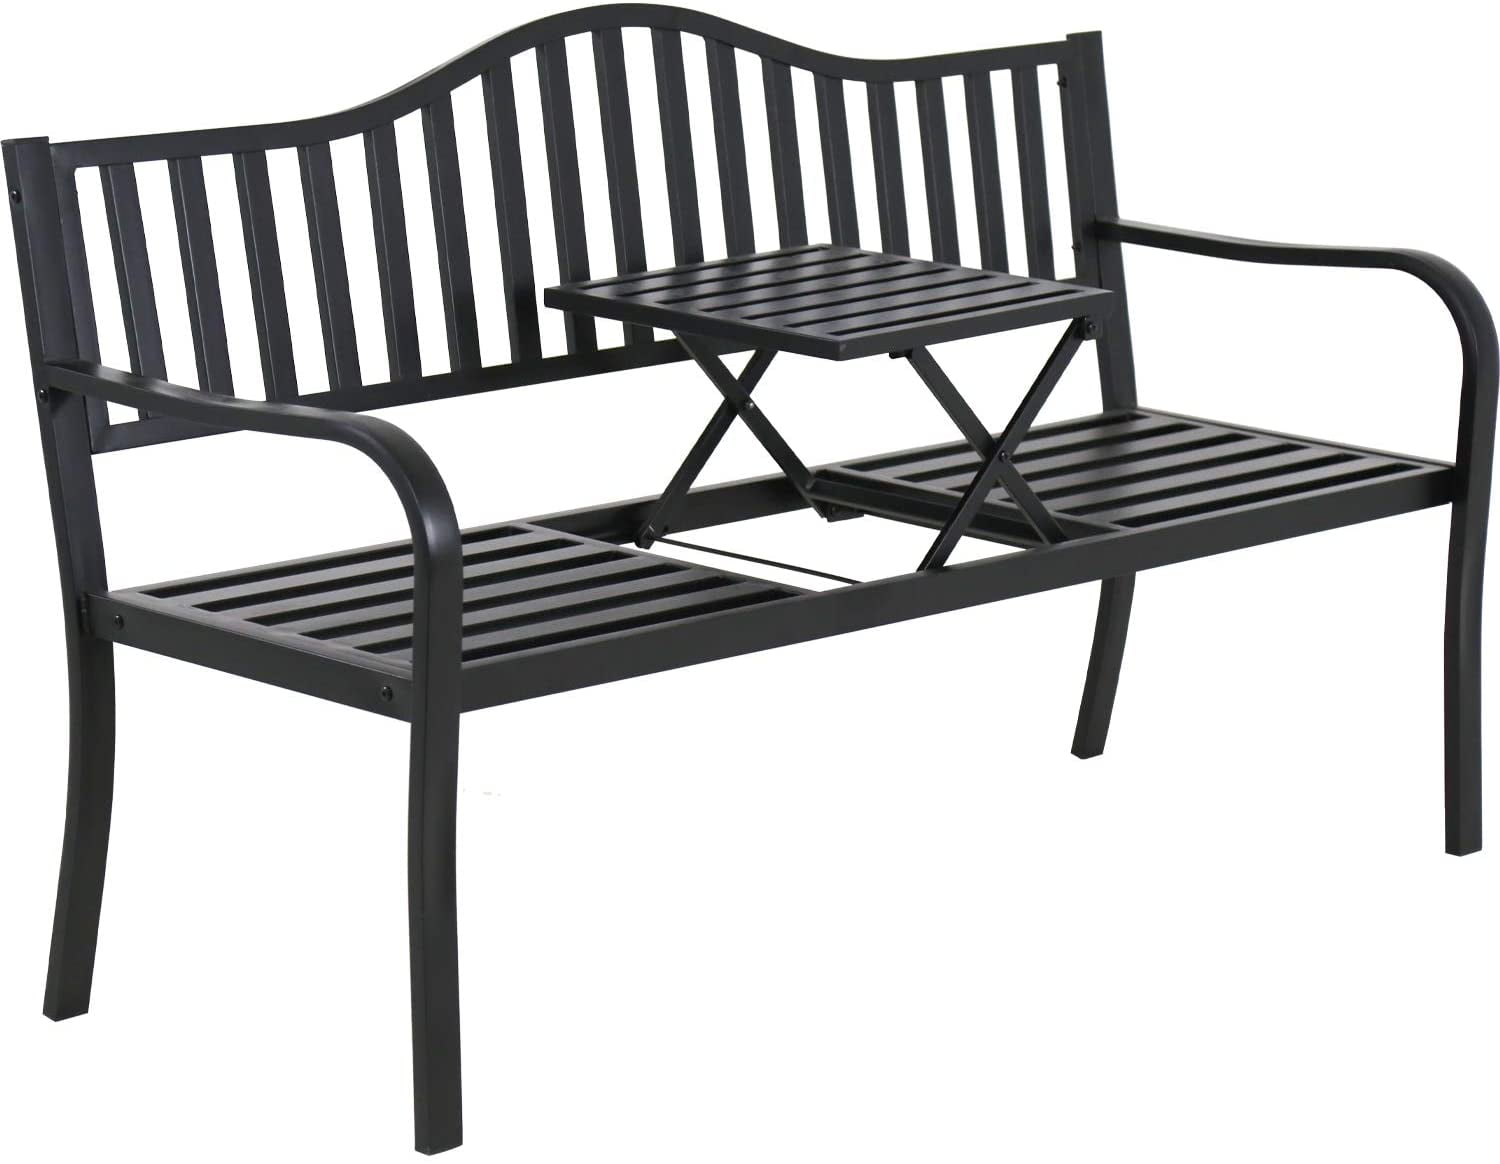 Park Bench Metal Bench Garden Bench Chair Outdoor Benches Clearance